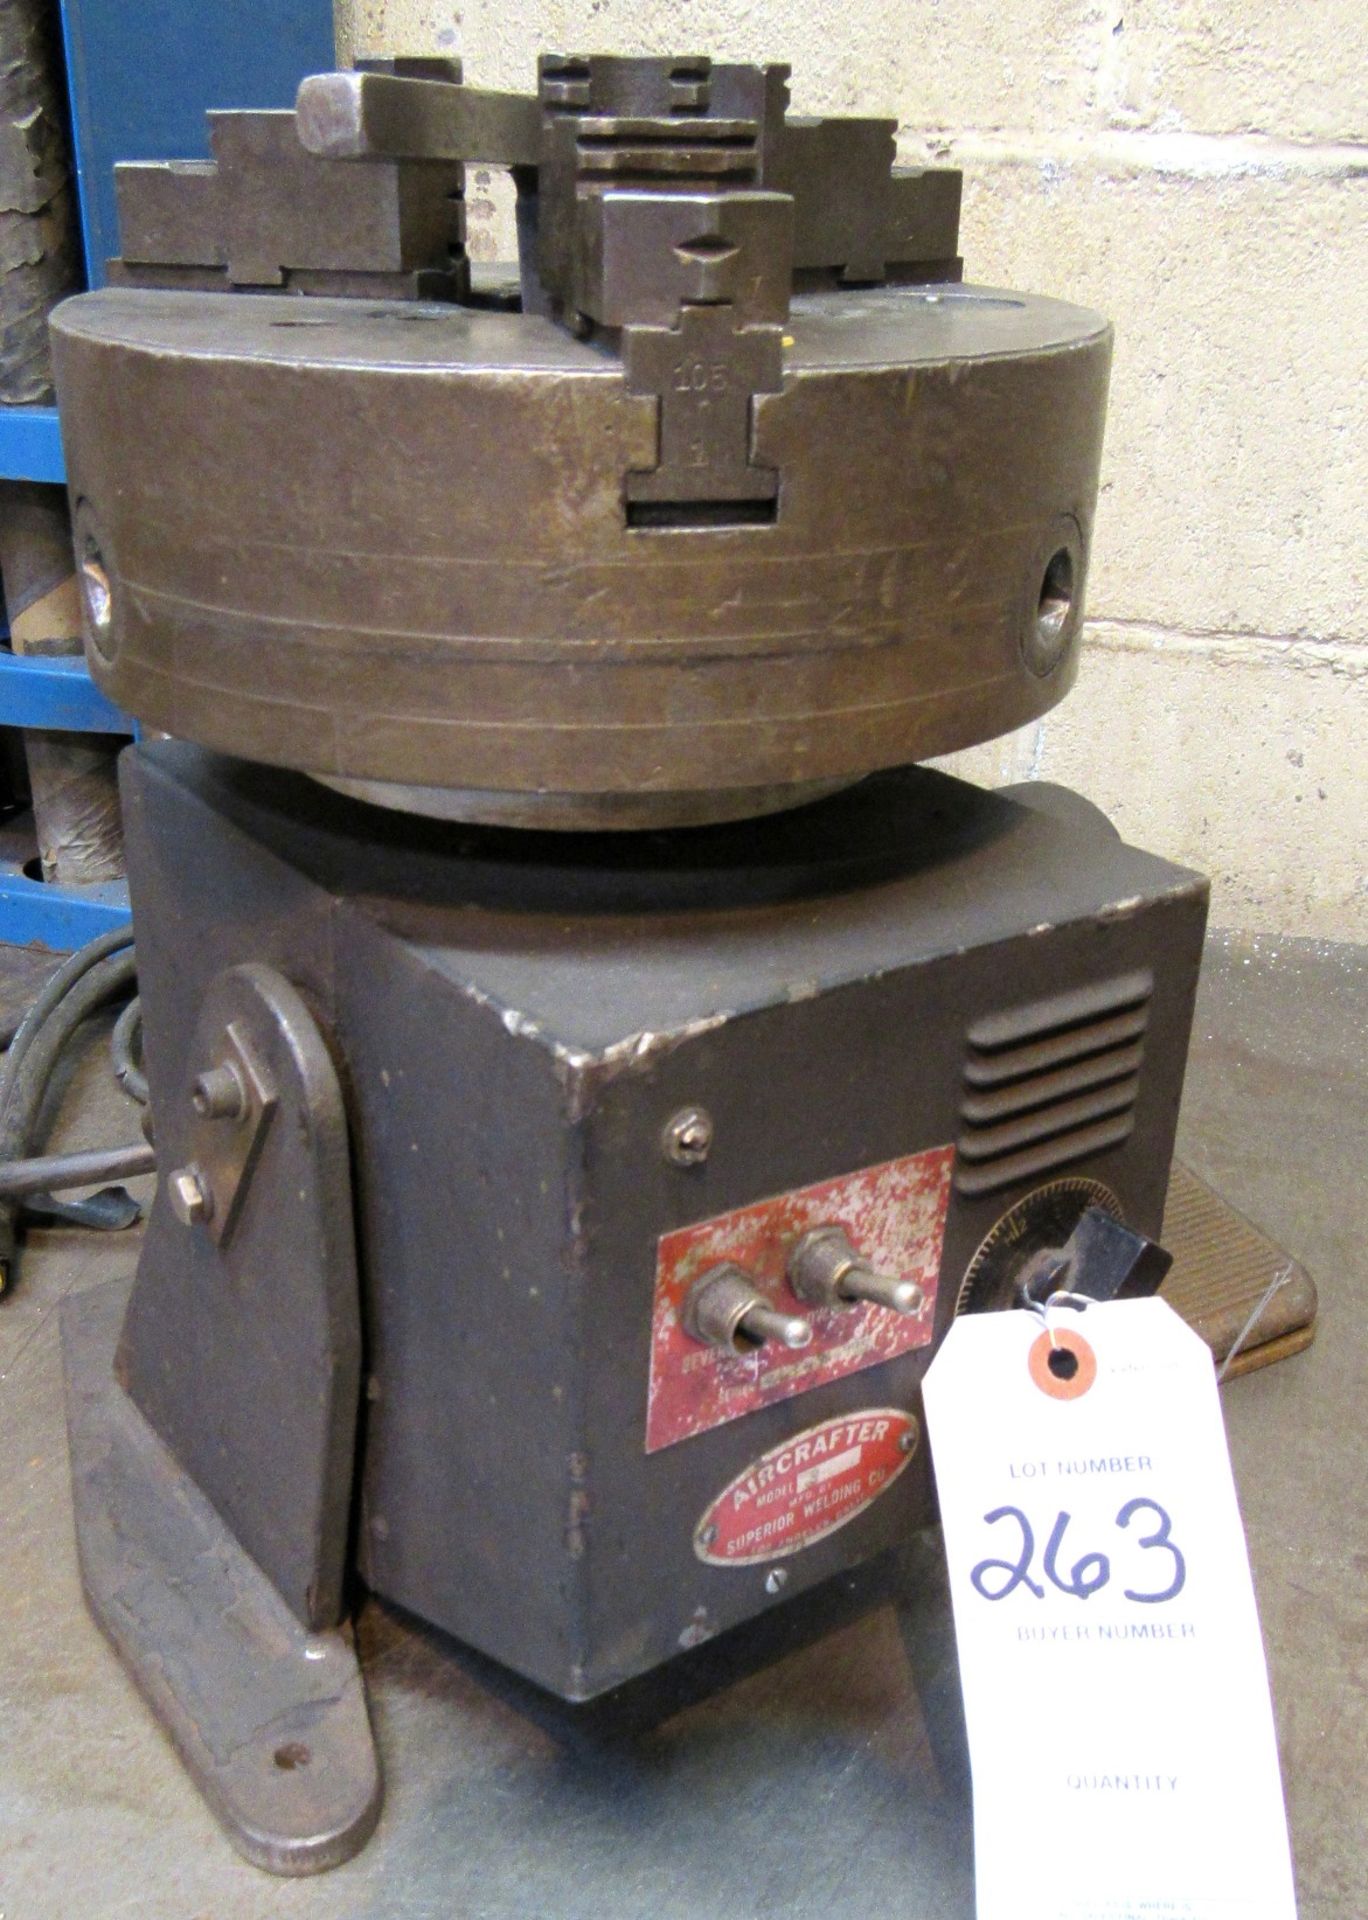 MK Products Aircrafter Mod.3 Rotary Welding Positioner w/ 8" 3-Jaw Chuck, 120/1/60 - Image 2 of 2